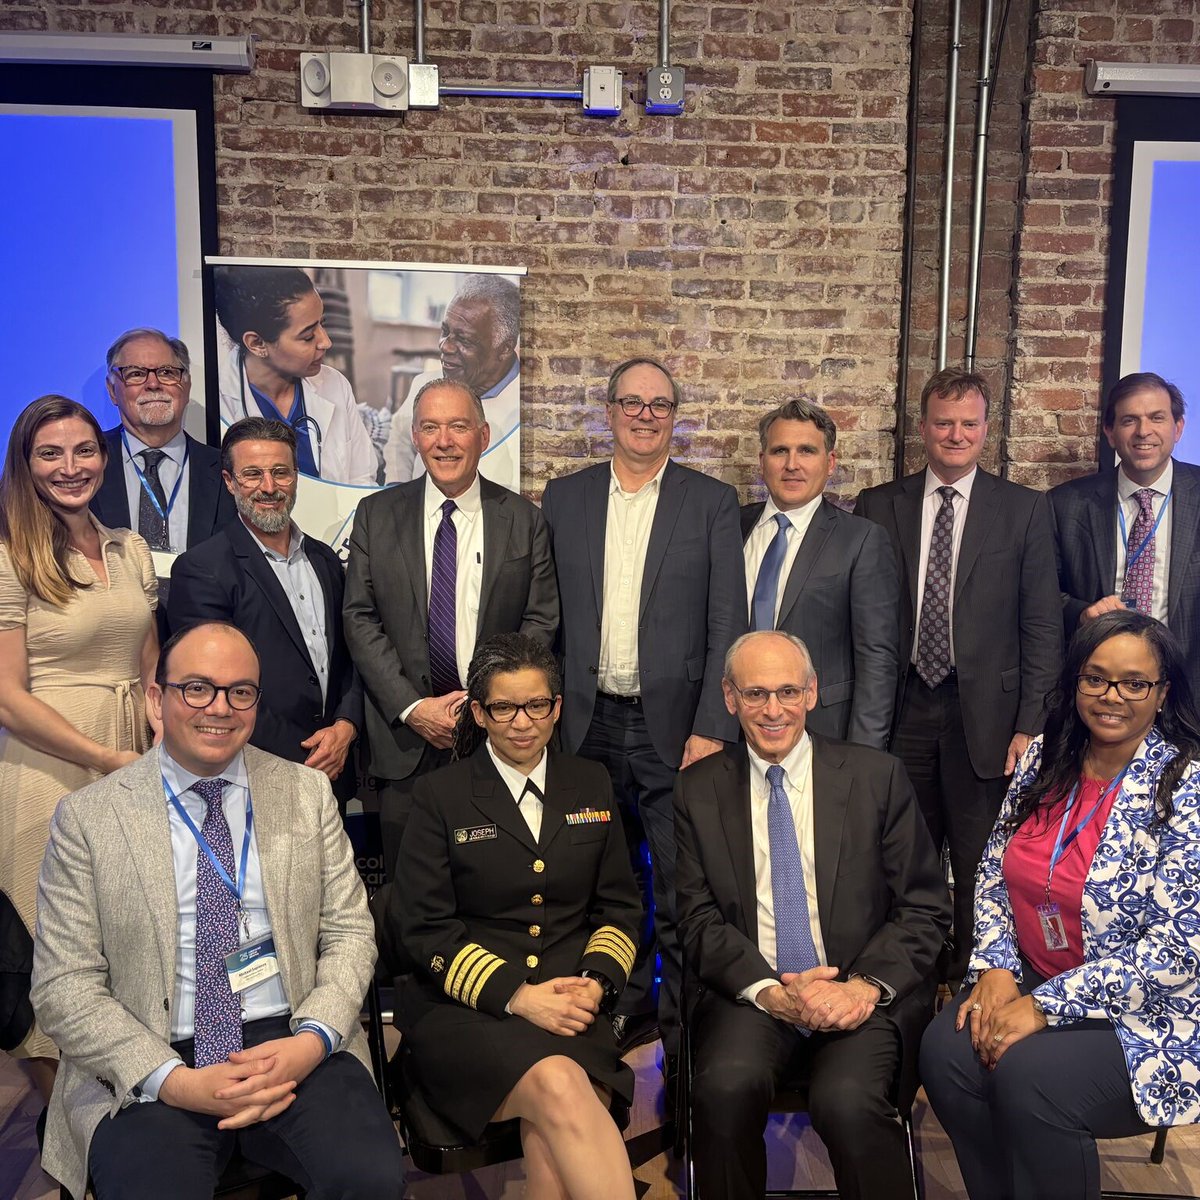 Recent advancements in colorectal cancer screening have led to a complex and confusing landscape, making it difficult for healthcare professionals and patients to choose the best screening options. To address this, the Colorectal Cancer Alliance hosted a dinner event in